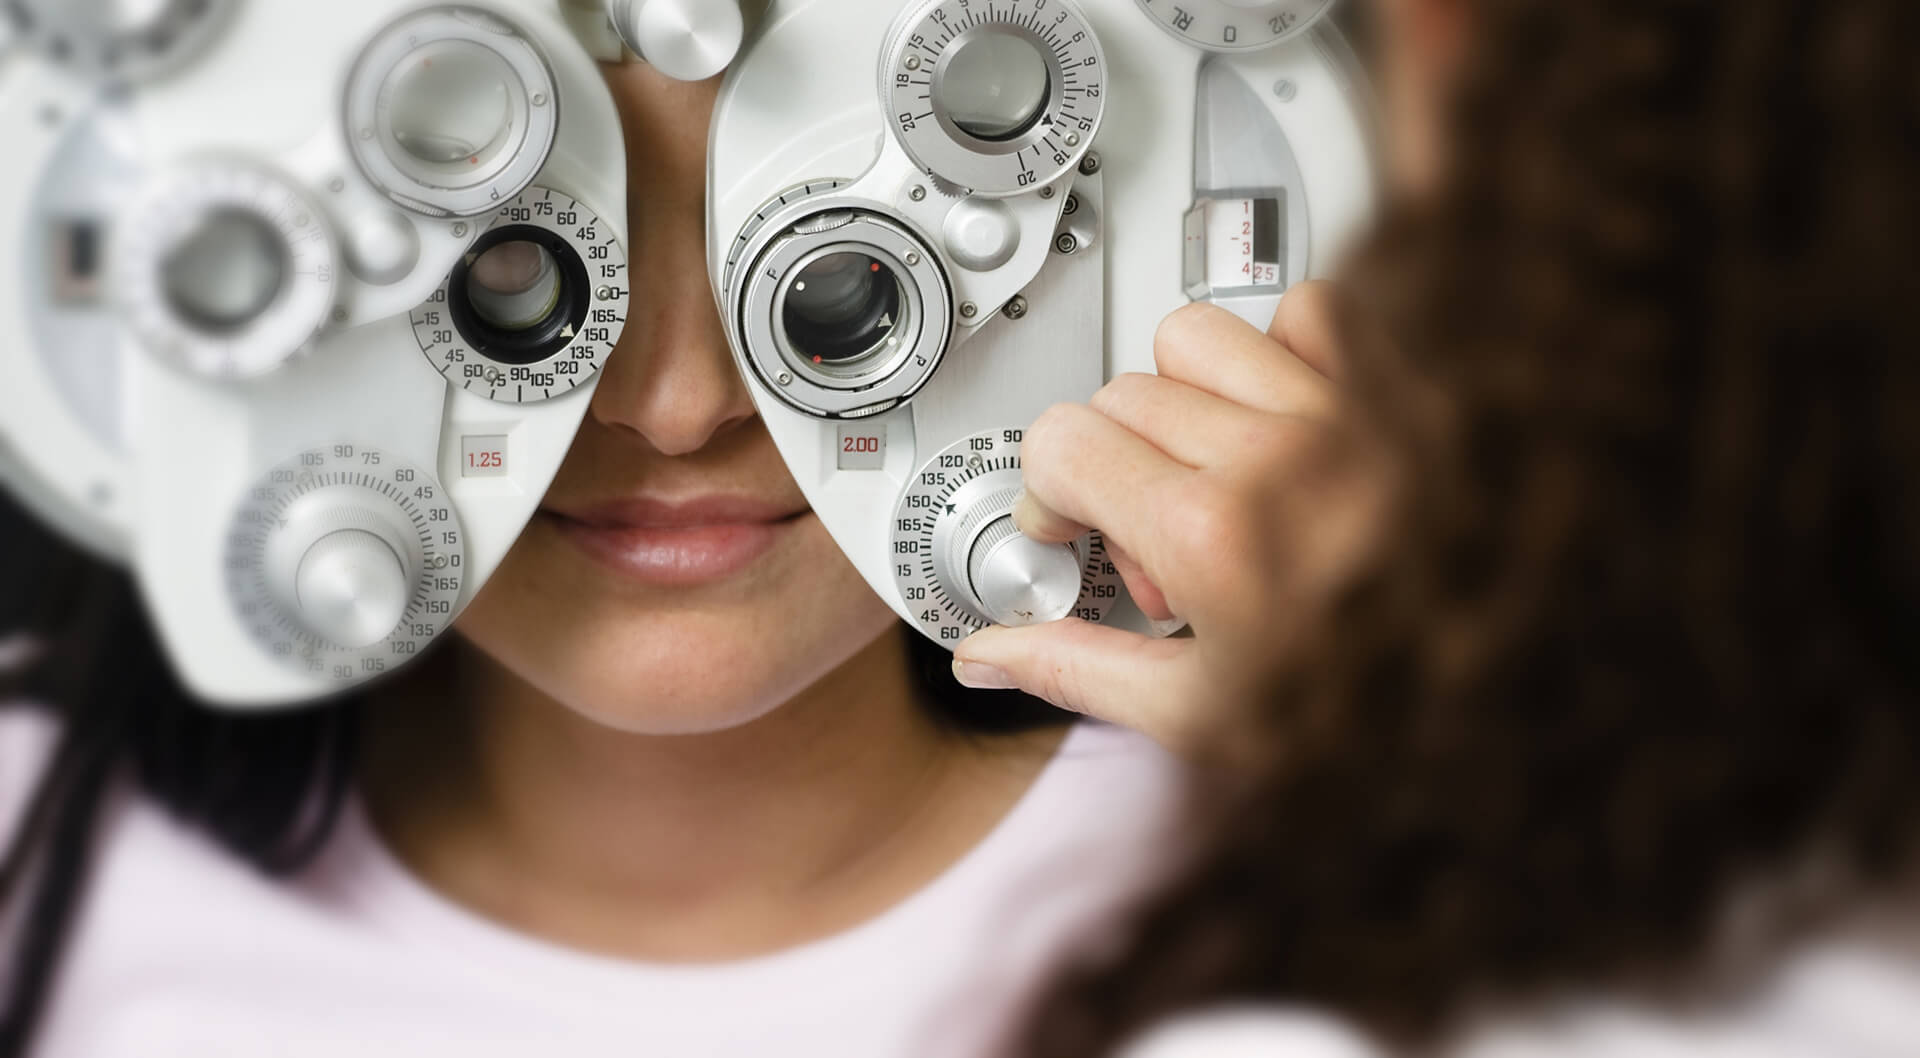 A close up shot of a person getting their eyes checked on a machine, with an optician adjusting knobs on the machine